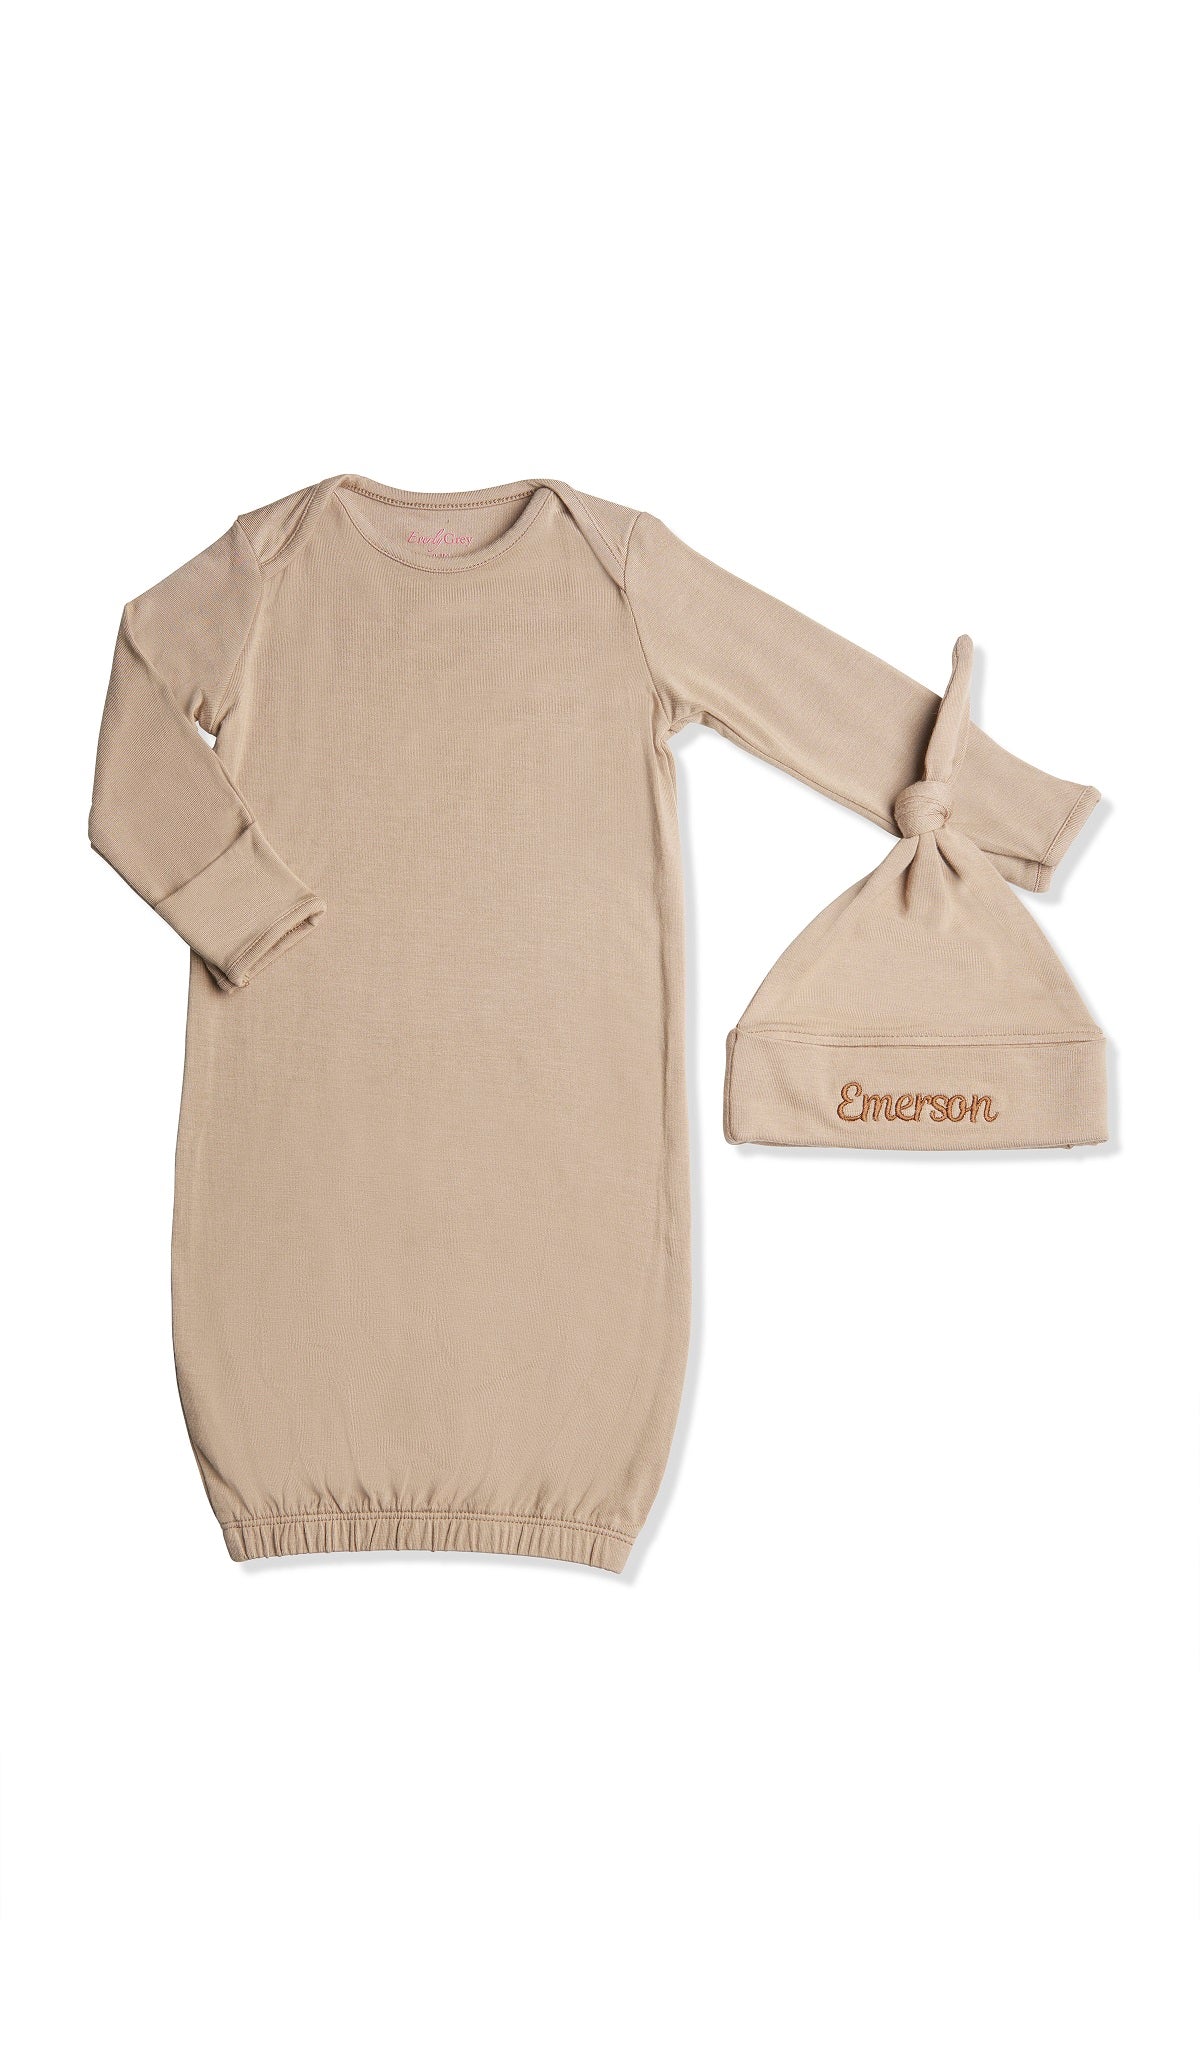 Personalized Gown 2-Piece Latte with name embroidered on knotted baby hat.